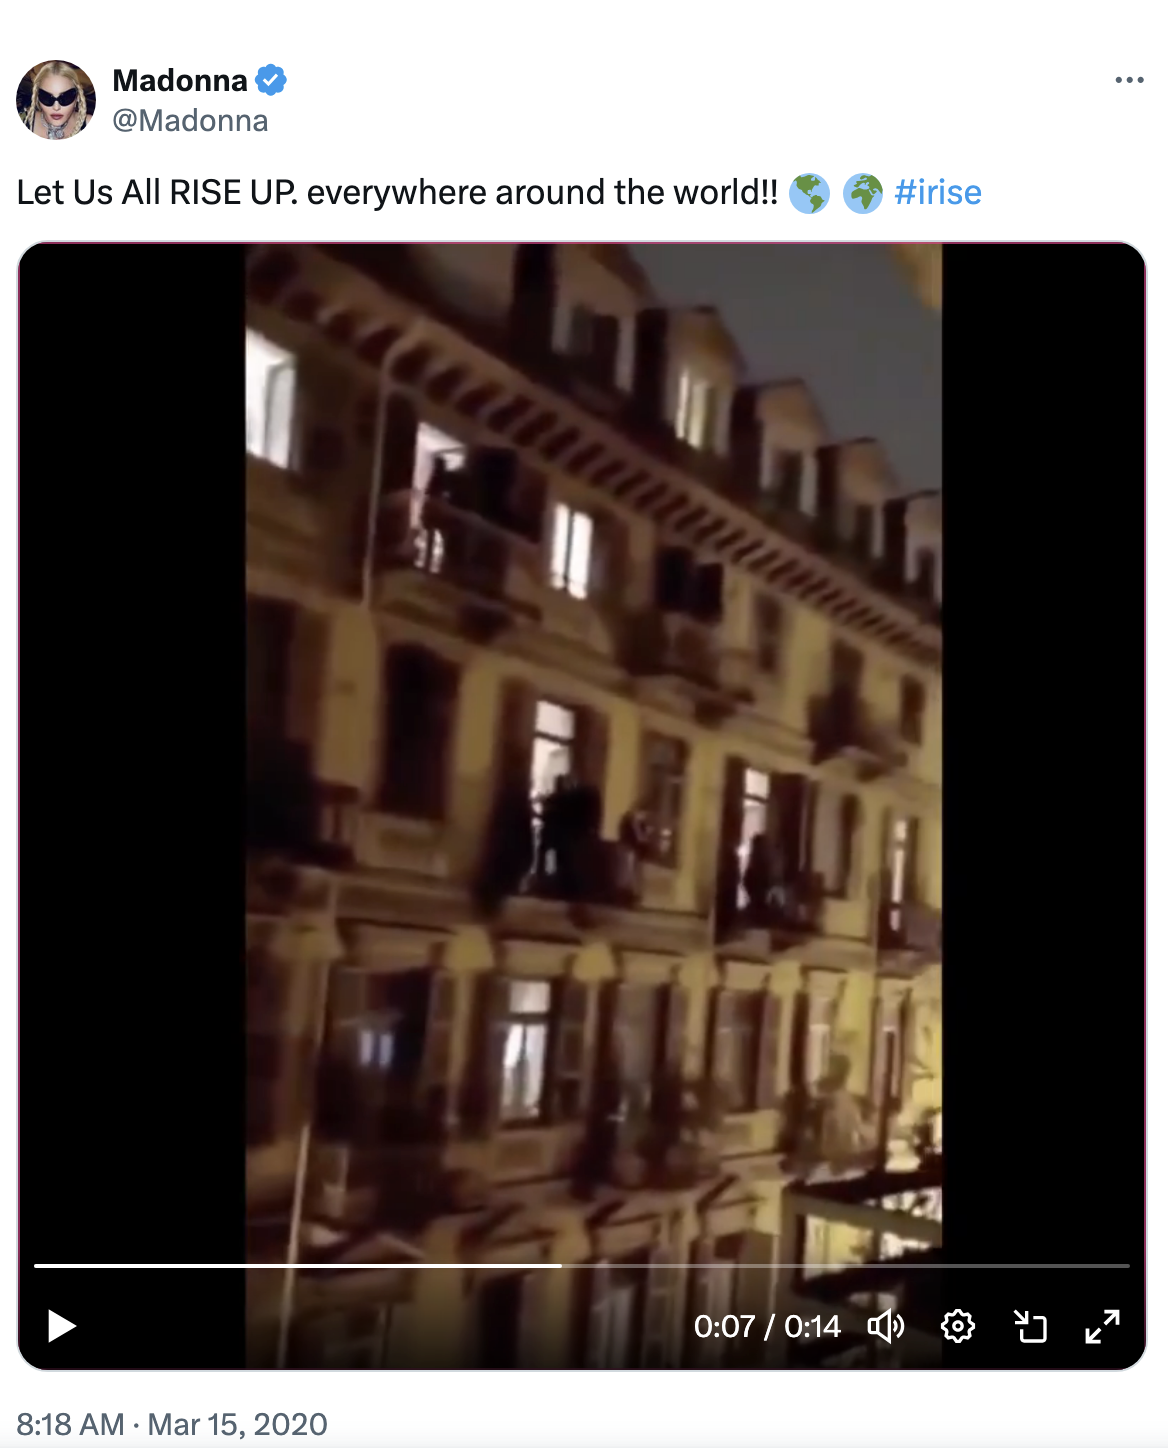 Tweet from Madonna encouraging unity with a video clip of people on apartment balconies at night. #Irise